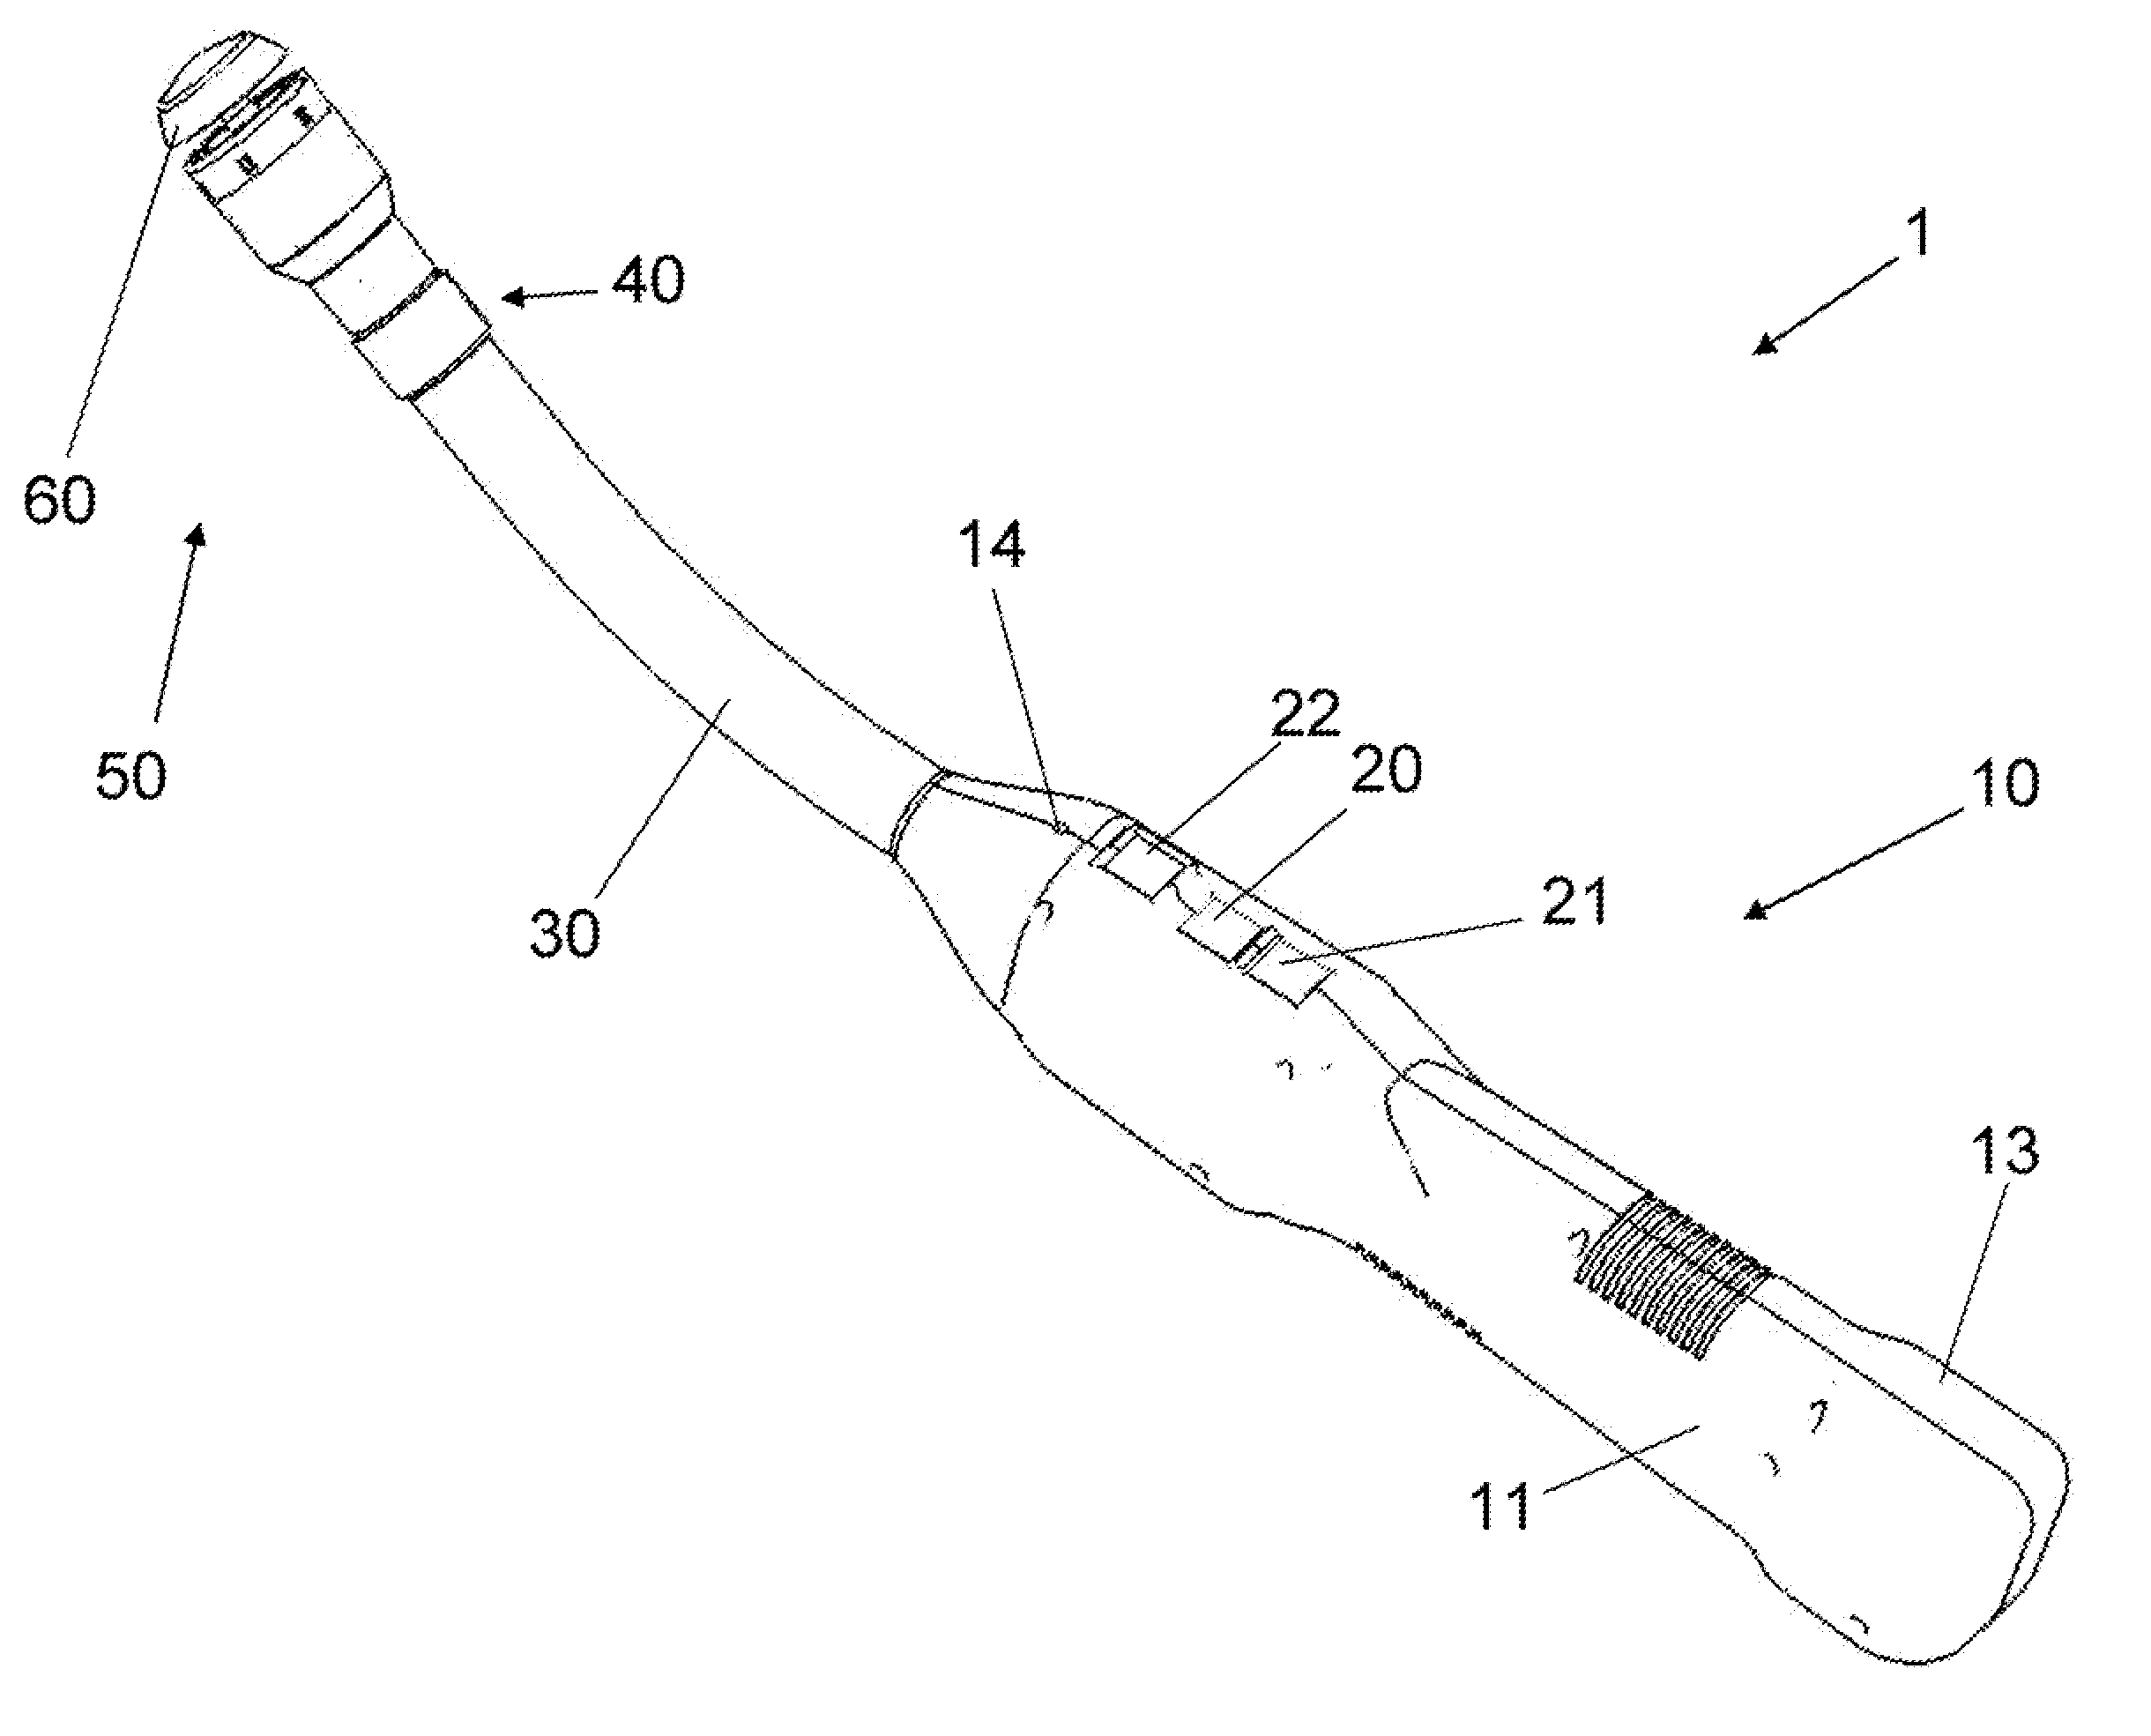 Active braking electrical surgical iinstrument and method for braking such an instrument